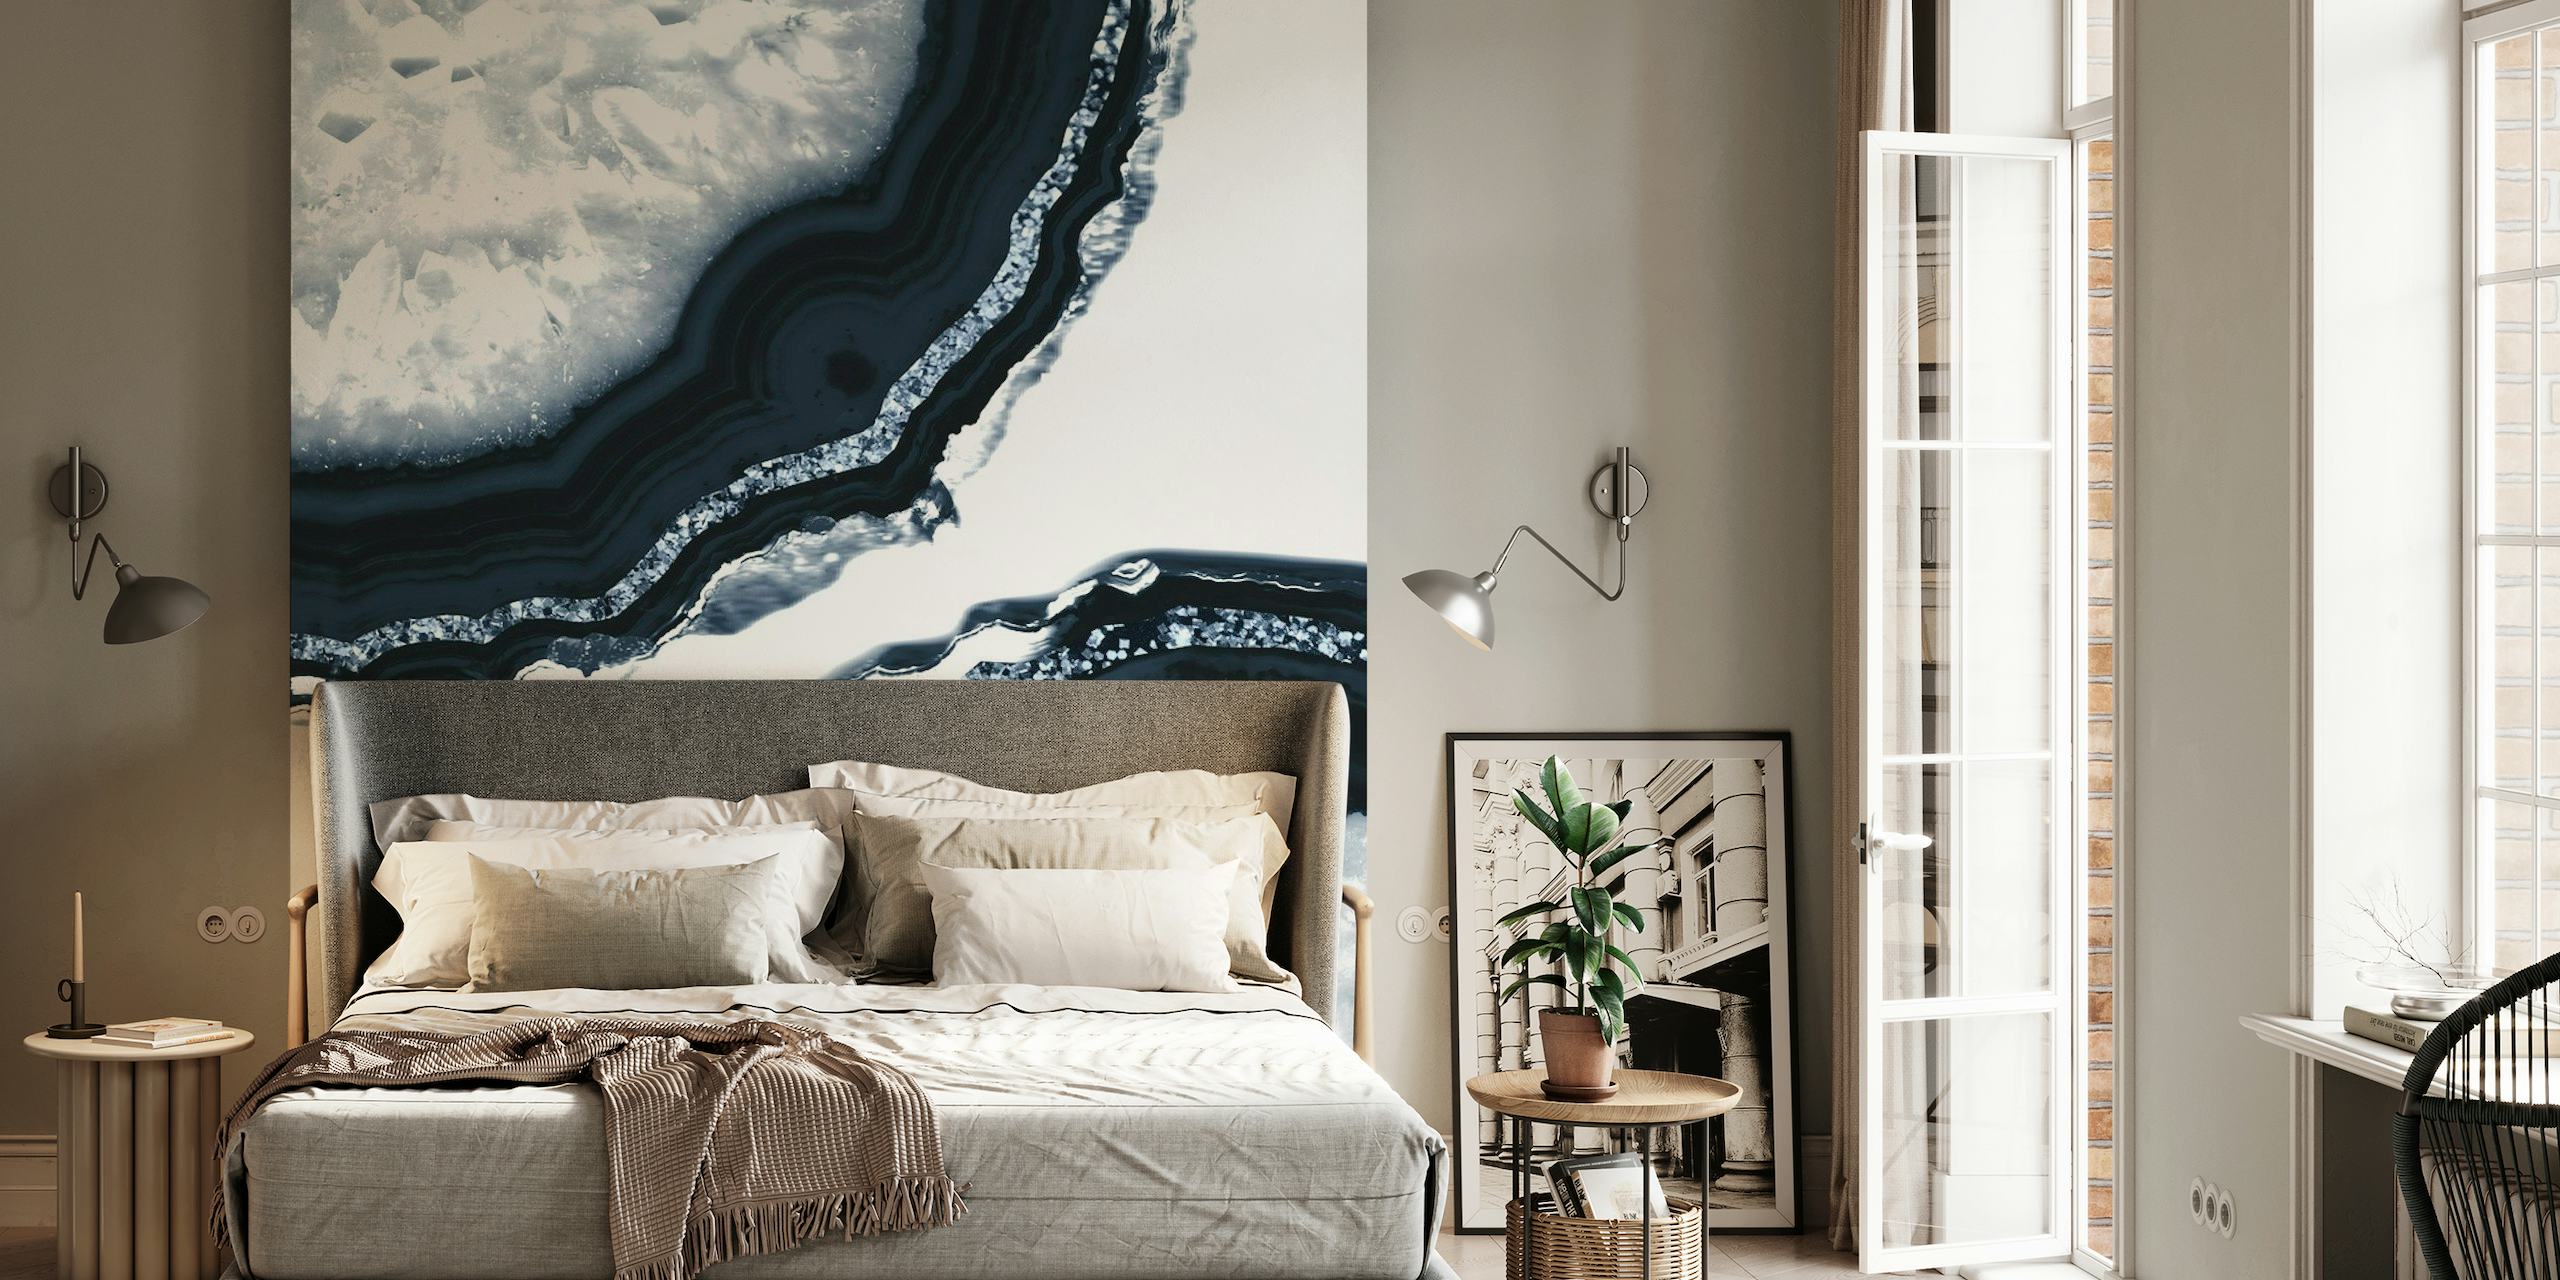 Agate Glitter Glam wall mural featuring layers of agate stone with sparkling glitter accents